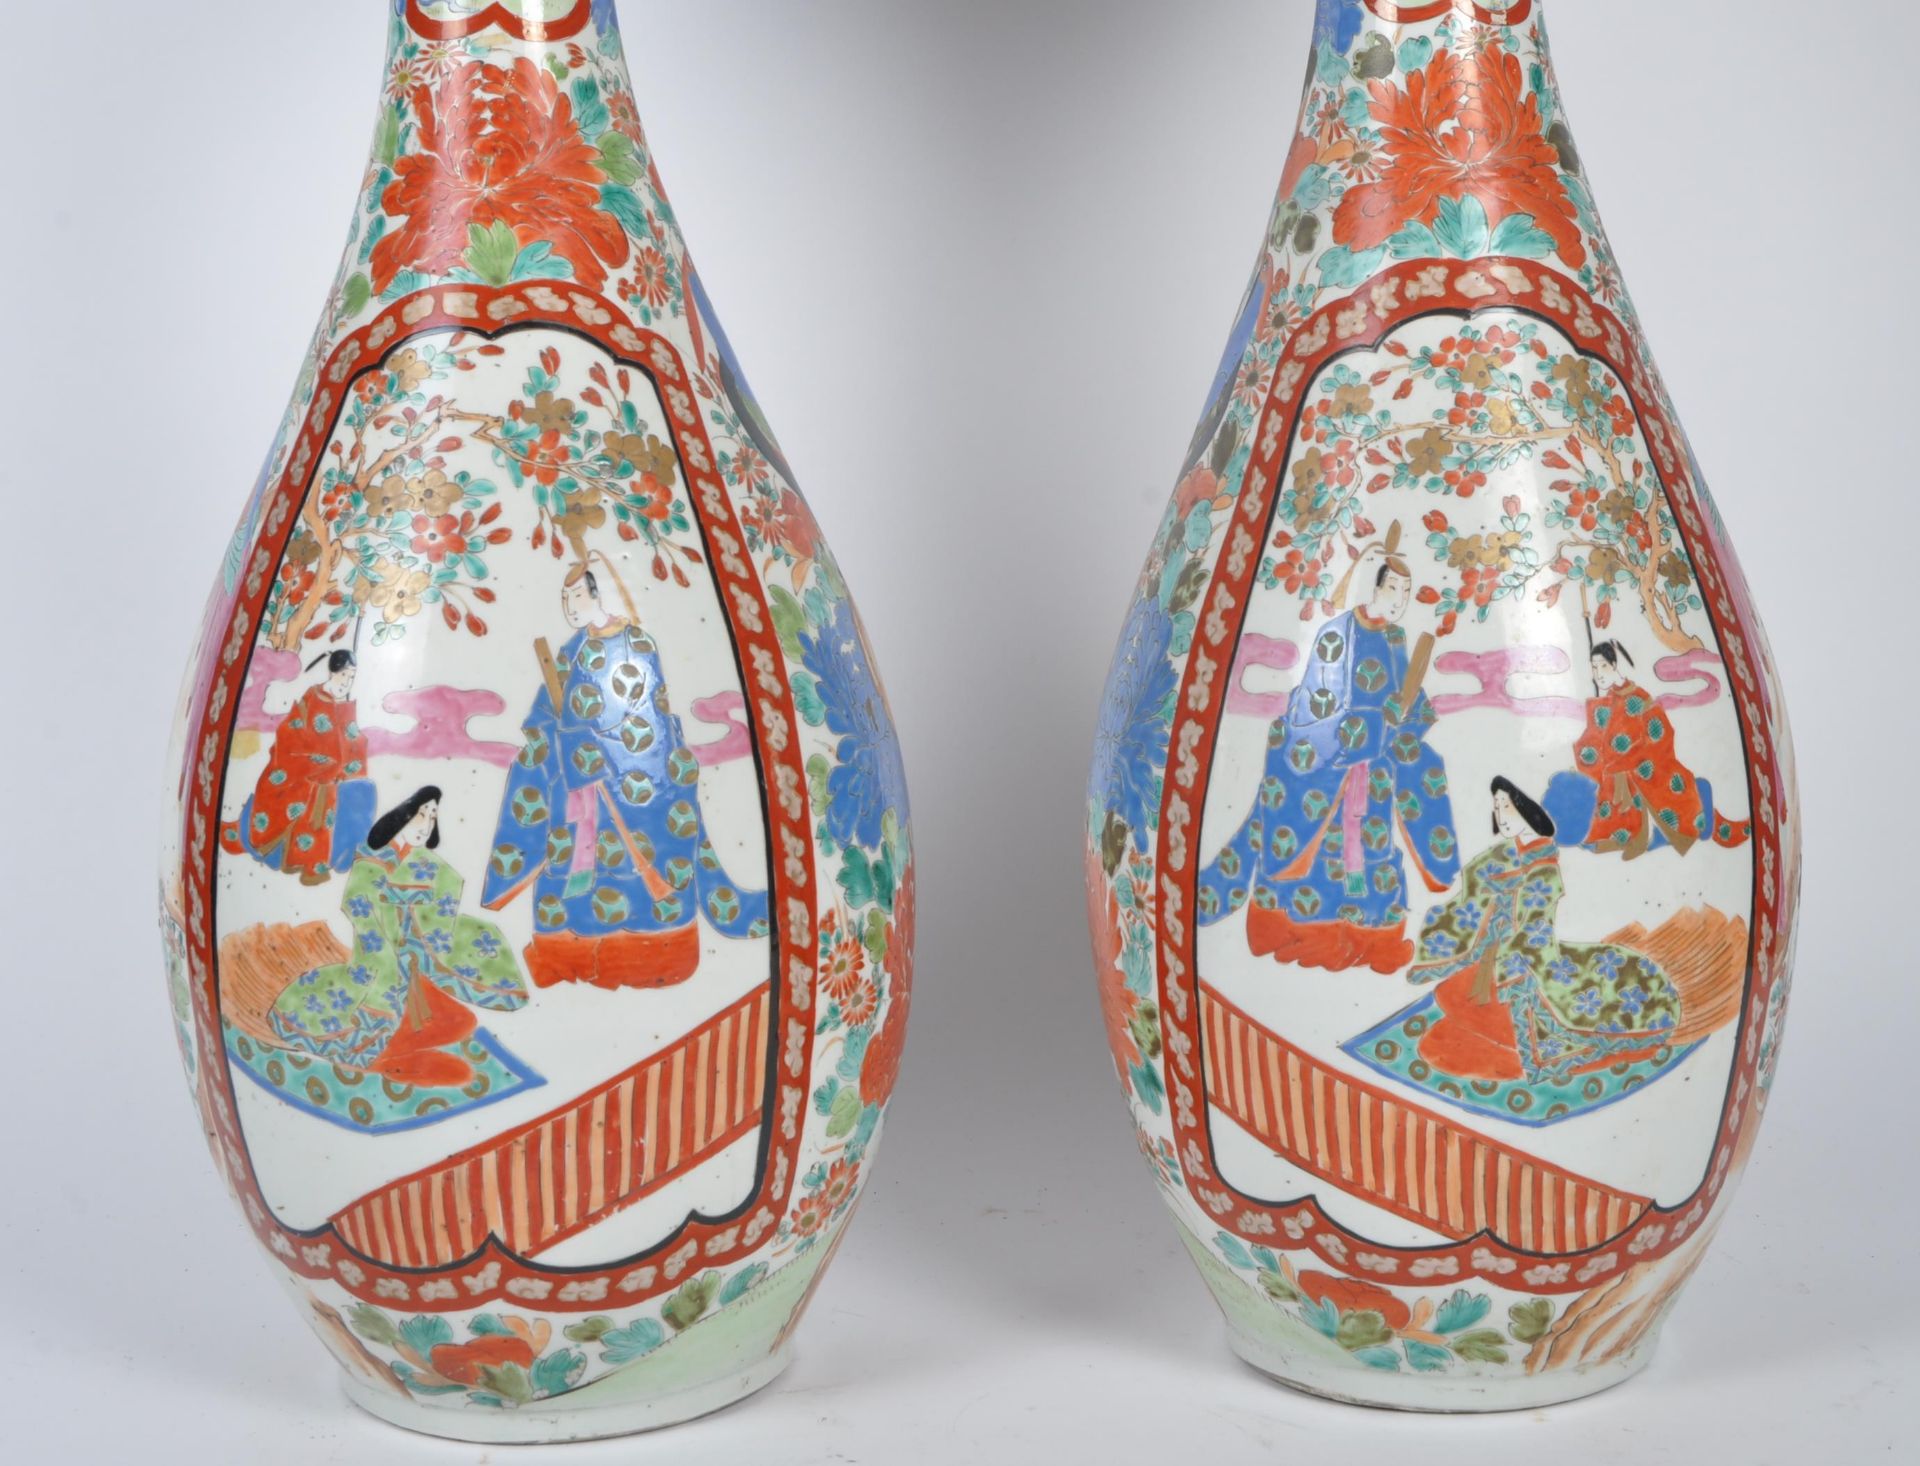 PAIR LARGE 19TH CENTURY CHINESE FAMILLE ROSE FLOOR VASES - Image 2 of 6